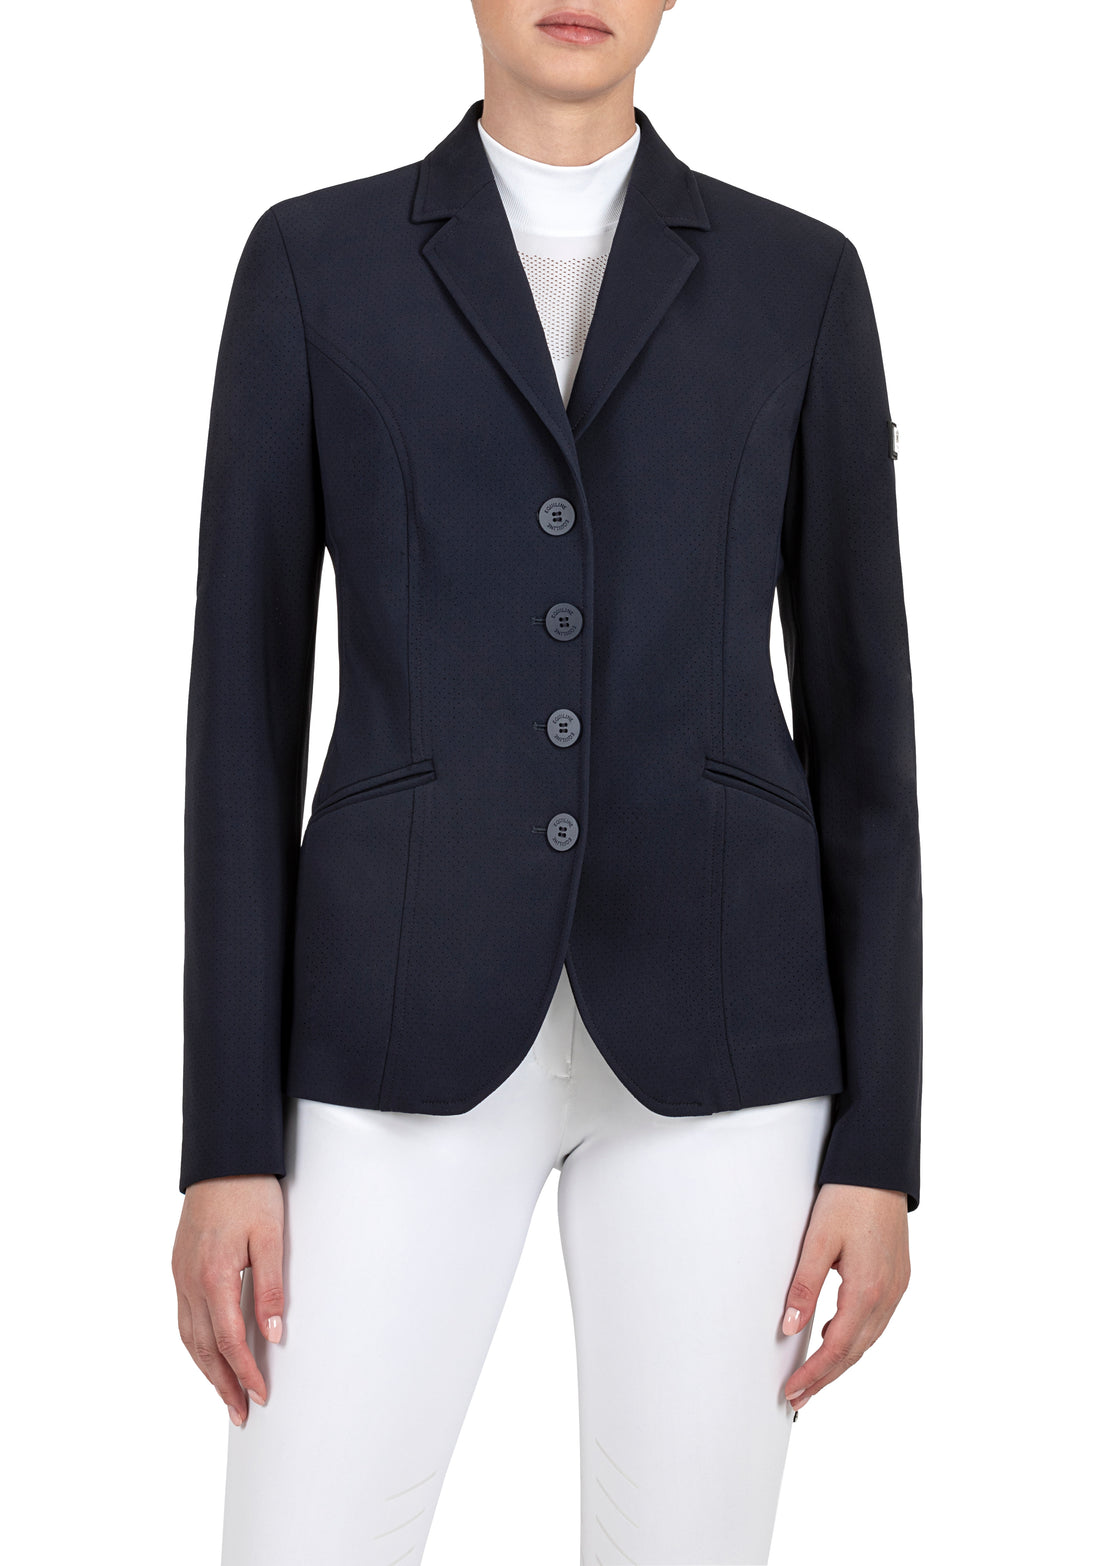 Equiline Cozy Navy Perforated Show Jacket